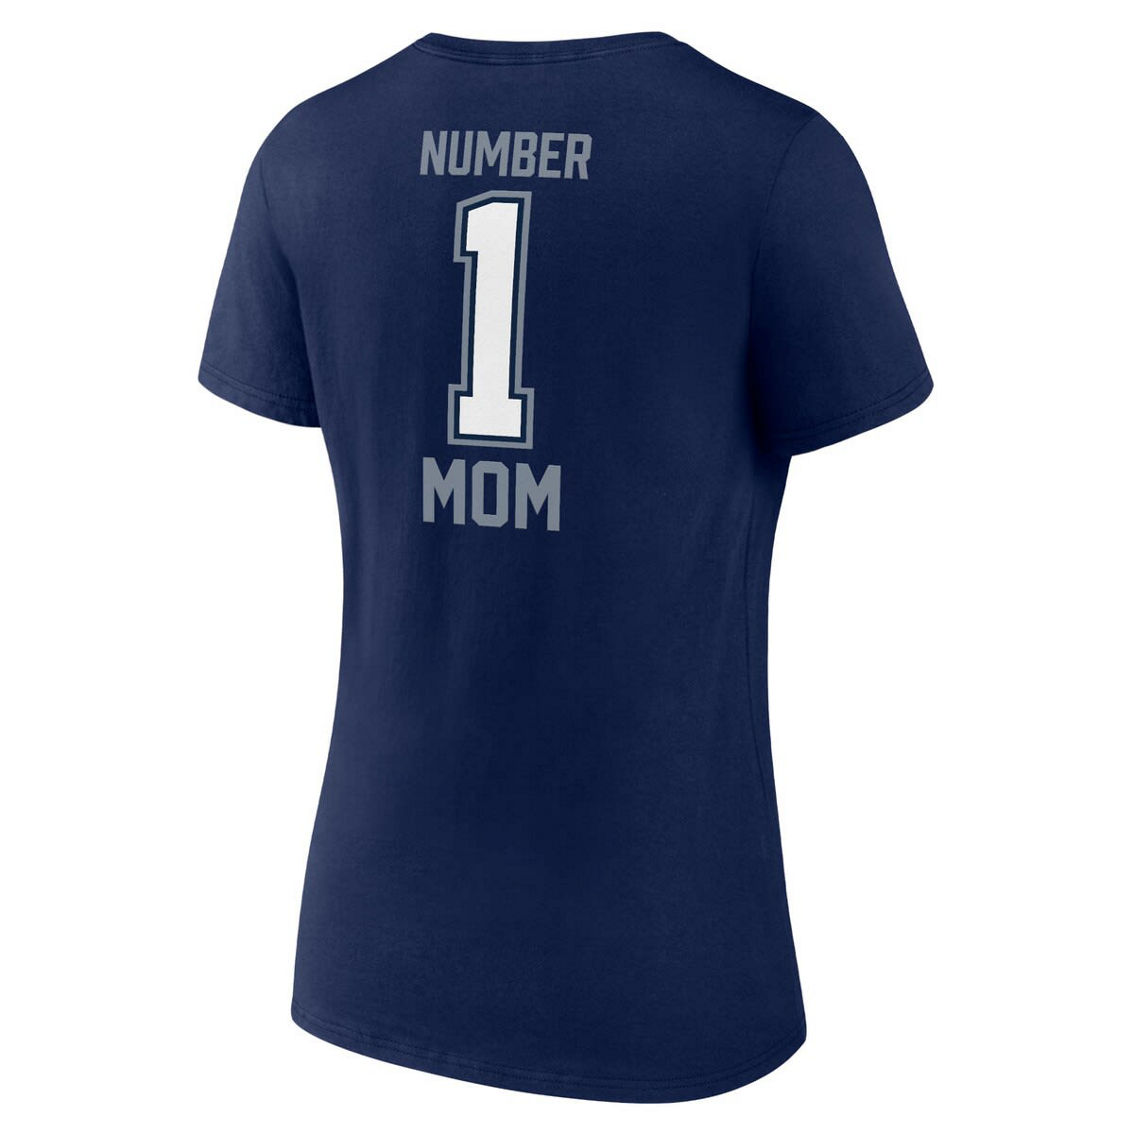 Fanatics Branded Women's Navy Dallas Cowboys Mother's Day V-Neck T-Shirt - Image 4 of 4